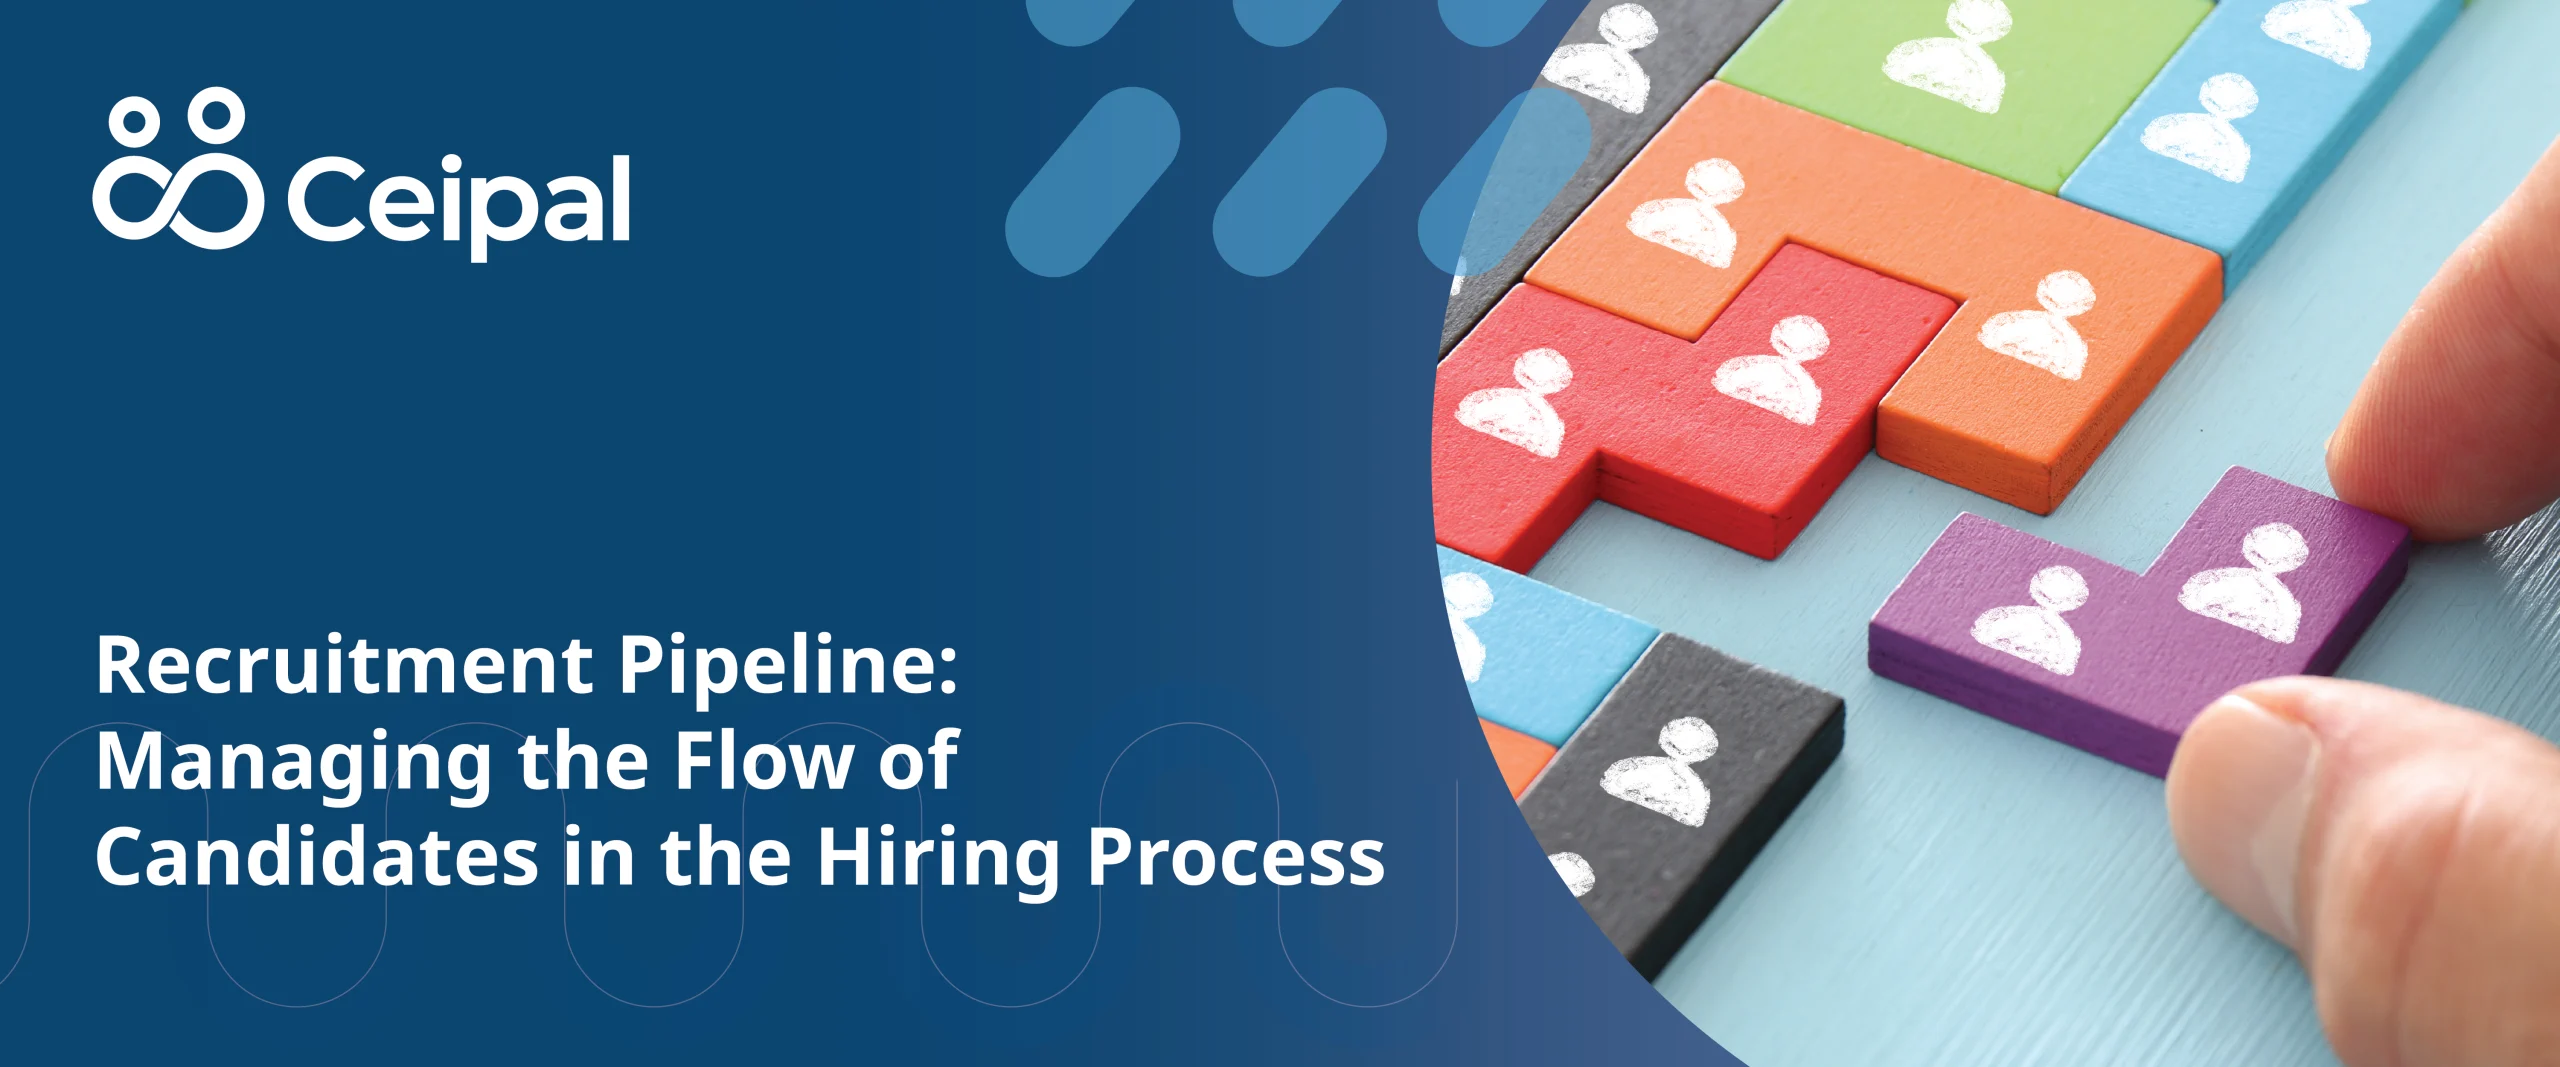 Recruitment Pipeline: Managing the Flow of Candidates in the Hiring Process